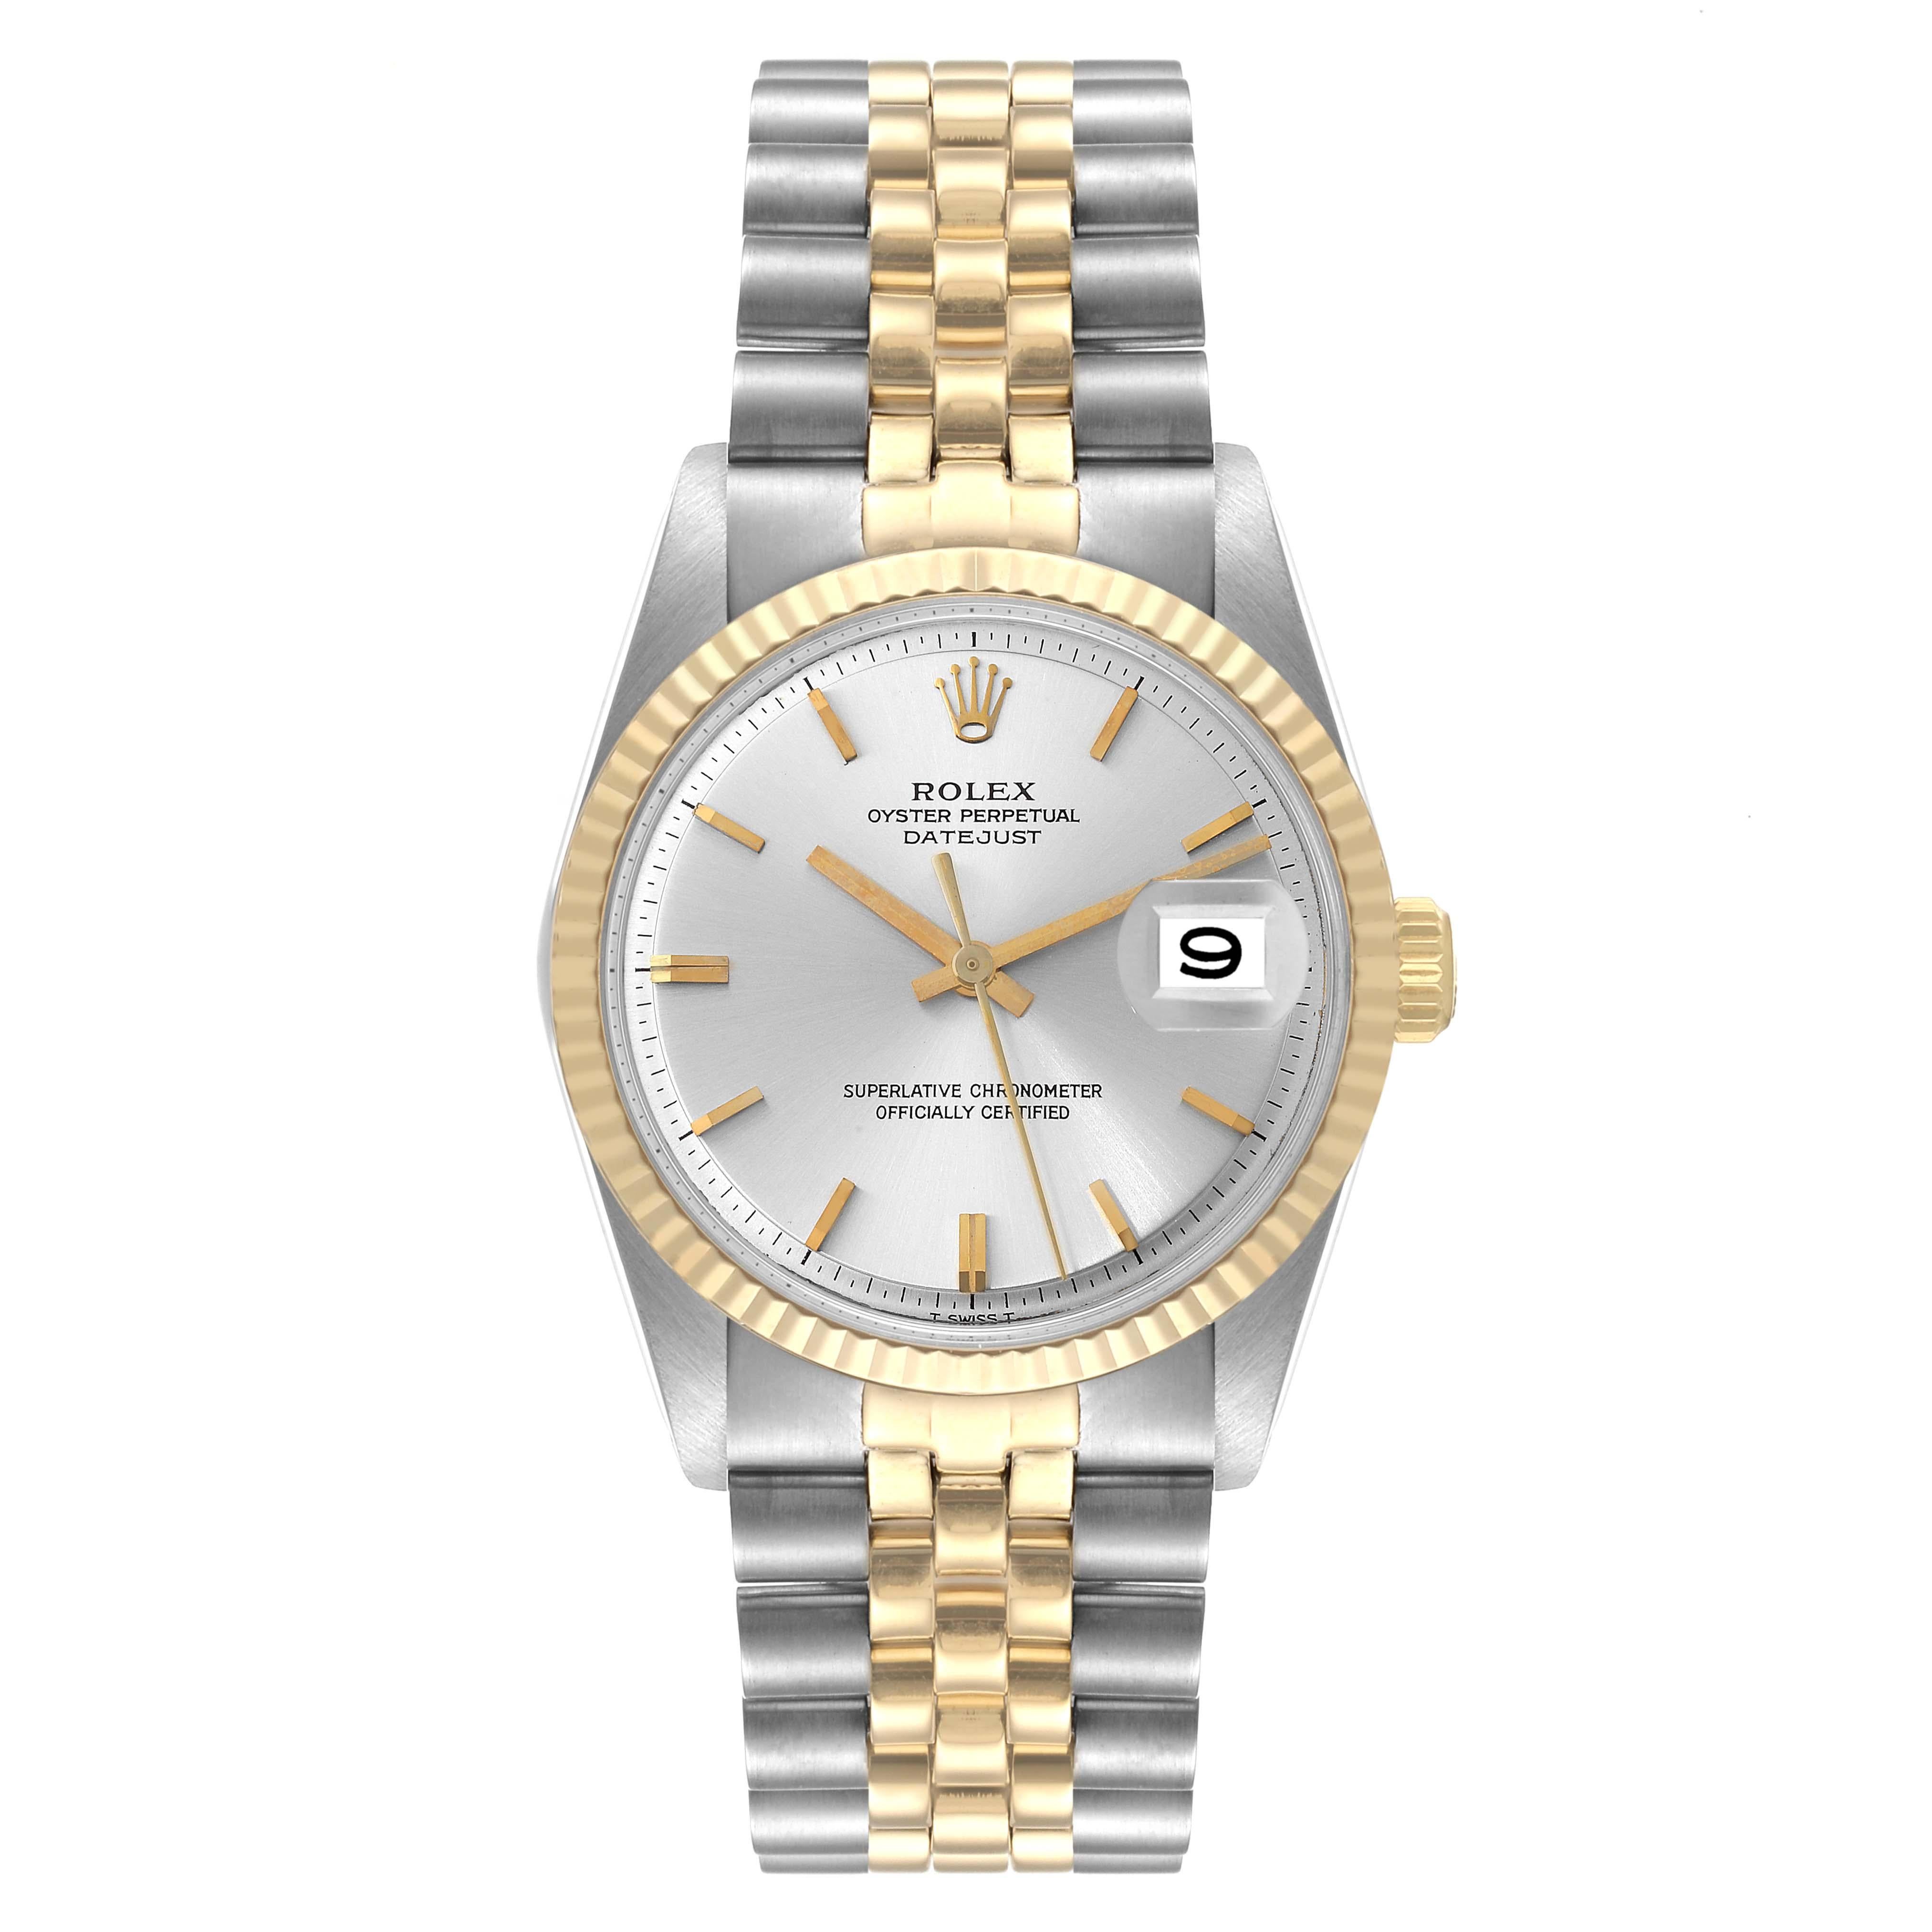 Rolex Datejust Steel Yellow Gold Silver Dial Vintage Mens Watch 1601 Box Papers. Officially certified chronometer automatic self-winding movement. Stainless steel case 36 mm in diameter. Rolex logo on a crown. Yellow gold fluted bezel. Acrylic